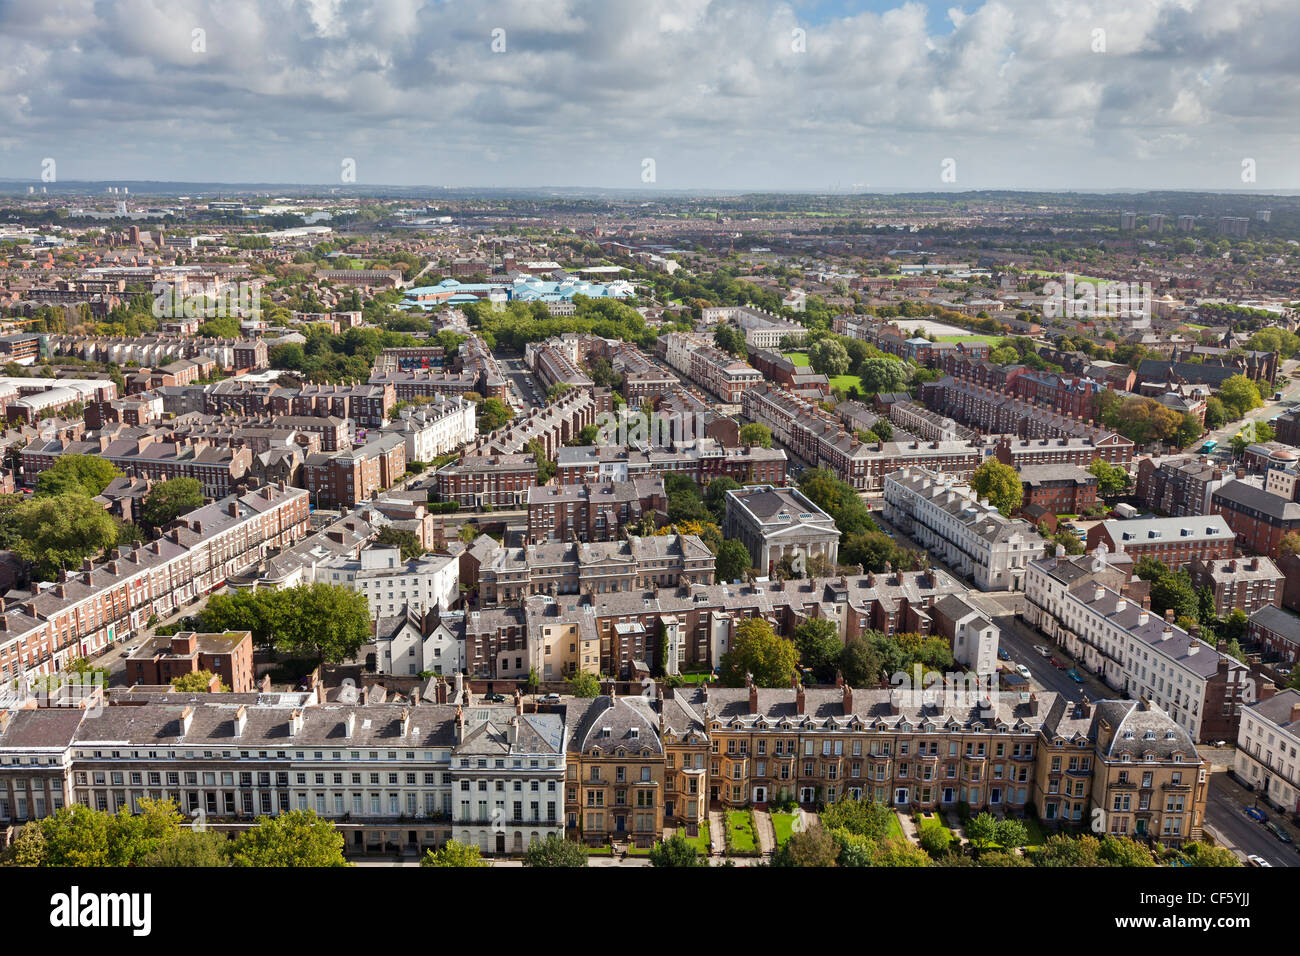 Aerial view over the city of Liverpool. Stock Photo